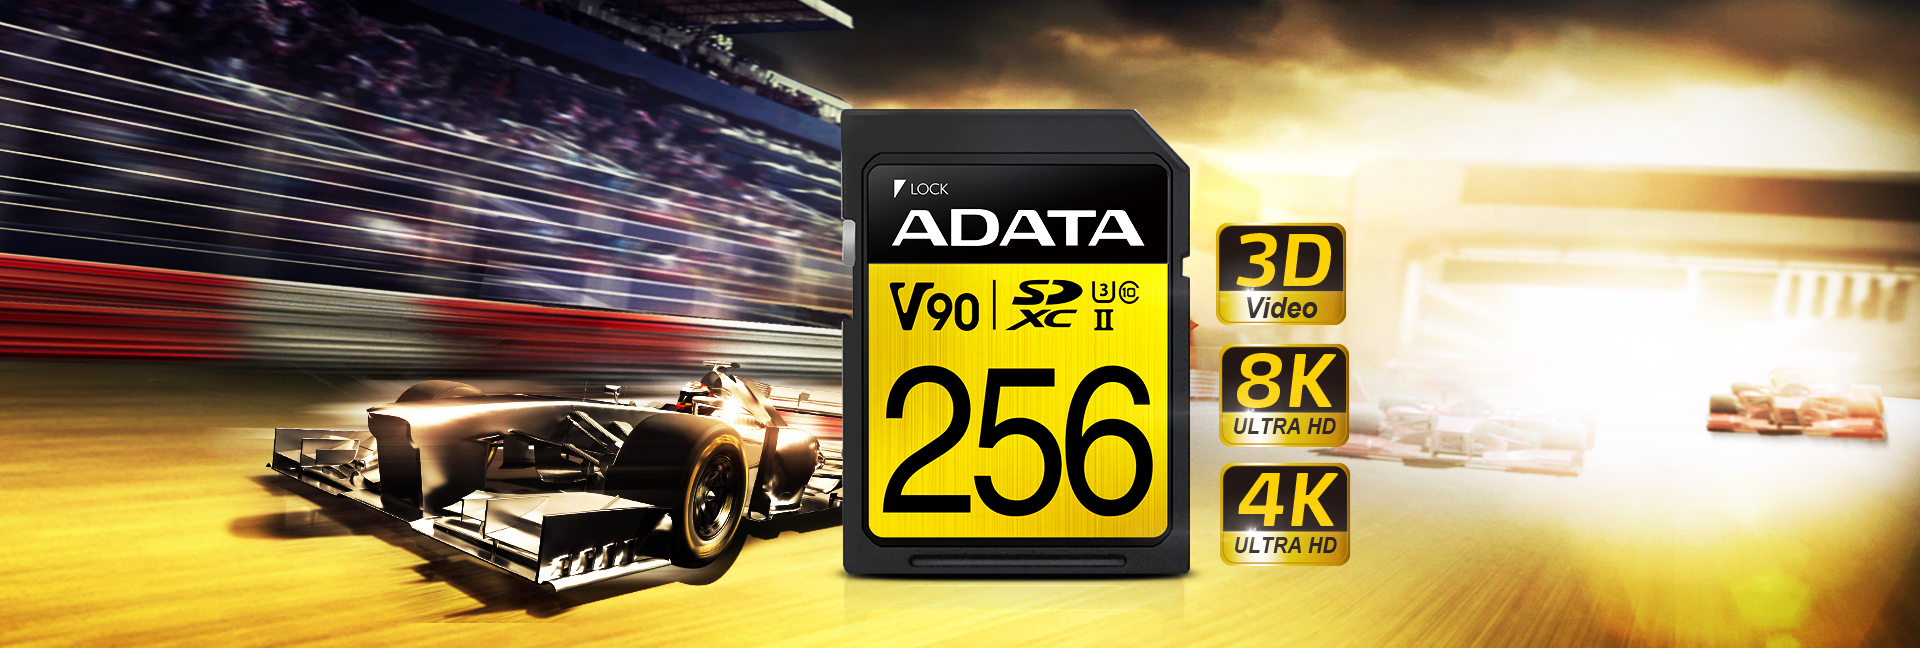 AData Premier One UHS-II V90 64GB SDXC Memory Card Review 290MB/s write  260MB/s read speed ASDX64GUII3CL10-C - Camera Memory Speed Comparison &  Performance tests for SD and CF cards